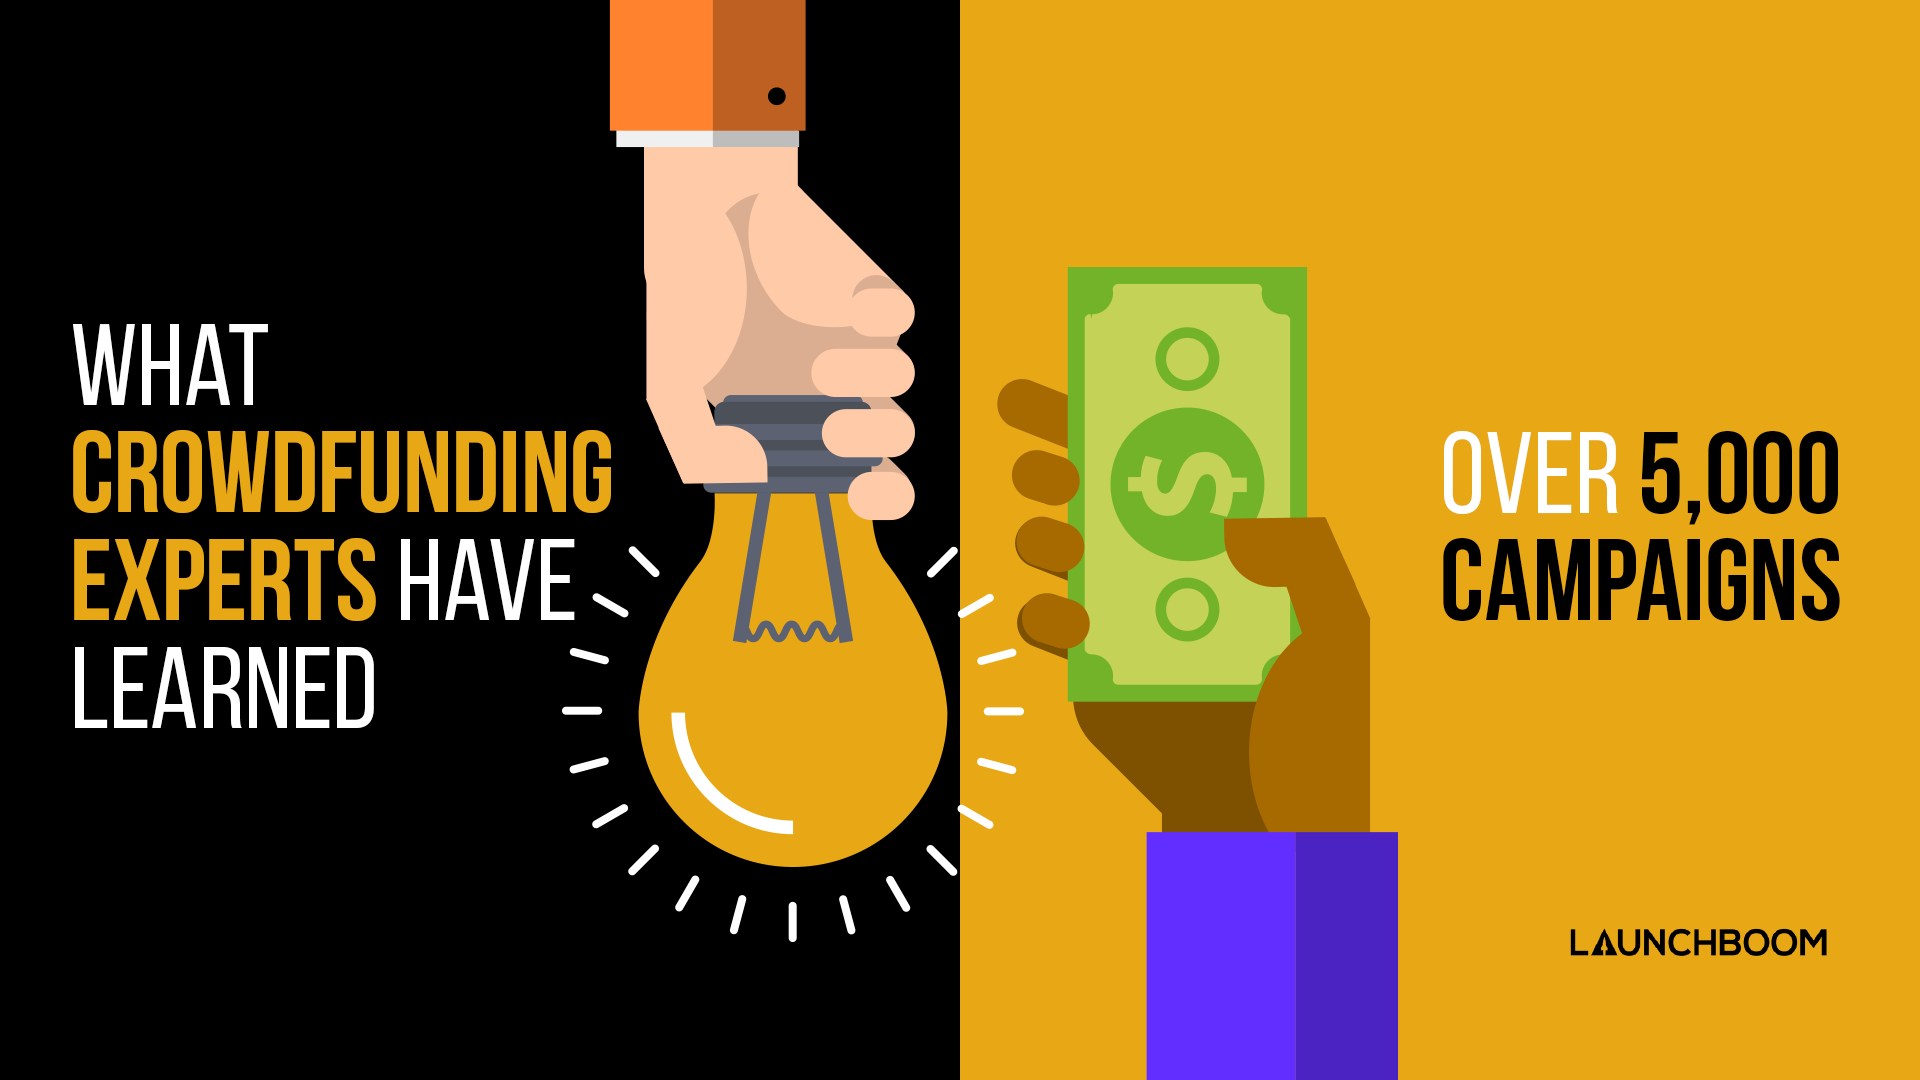 What crowdfunding experts have learned over 5,000 campaigns